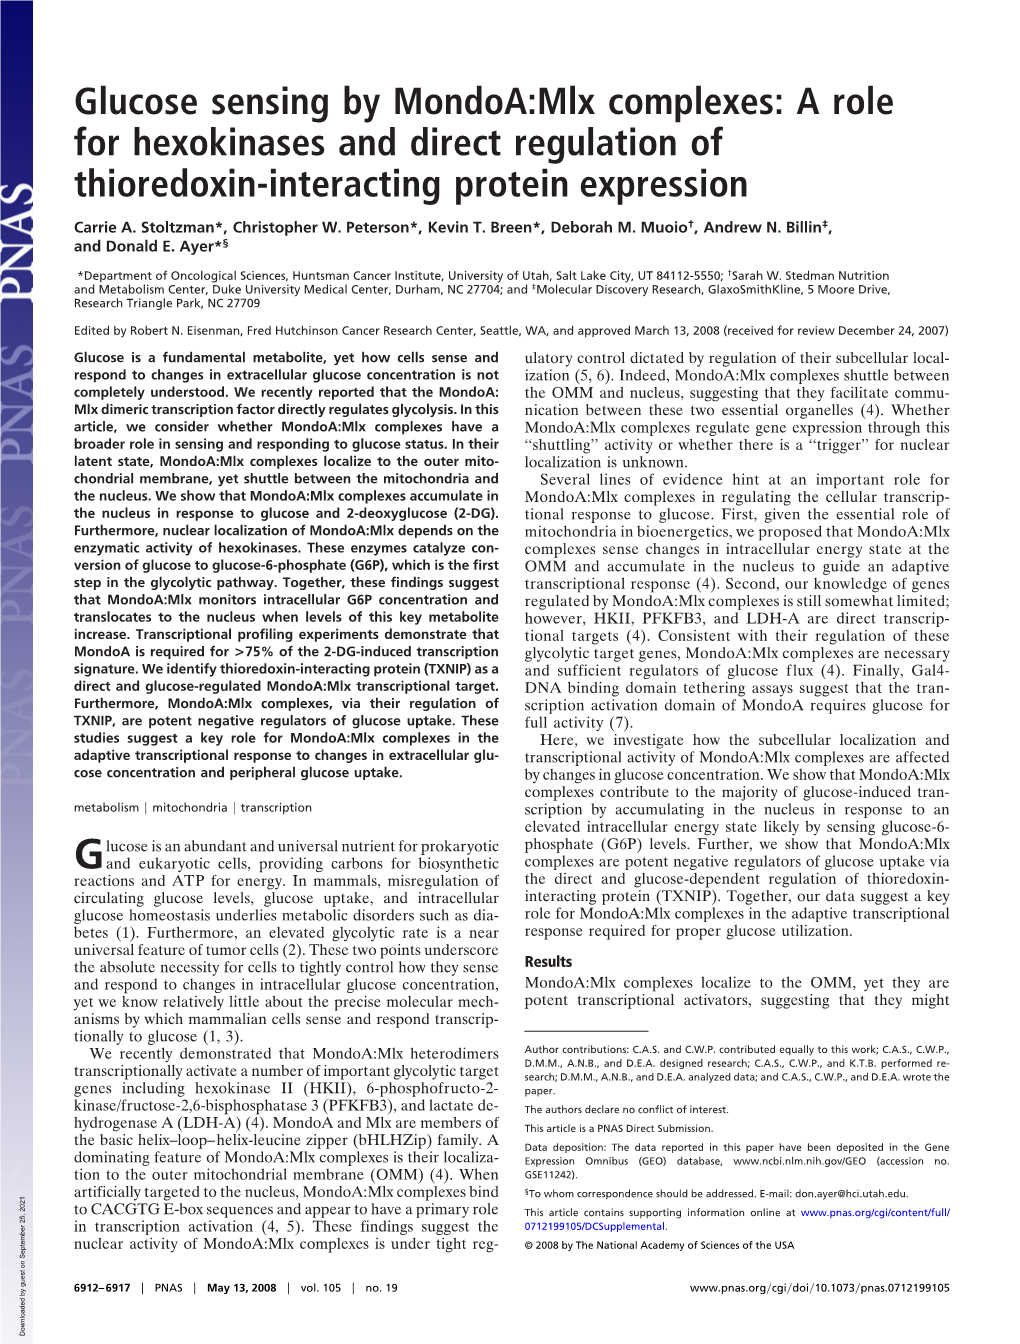 Glucose Sensing by Mondoa:Mlx Complexes: a Role for Hexokinases and Direct Regulation of Thioredoxin-Interacting Protein Expression